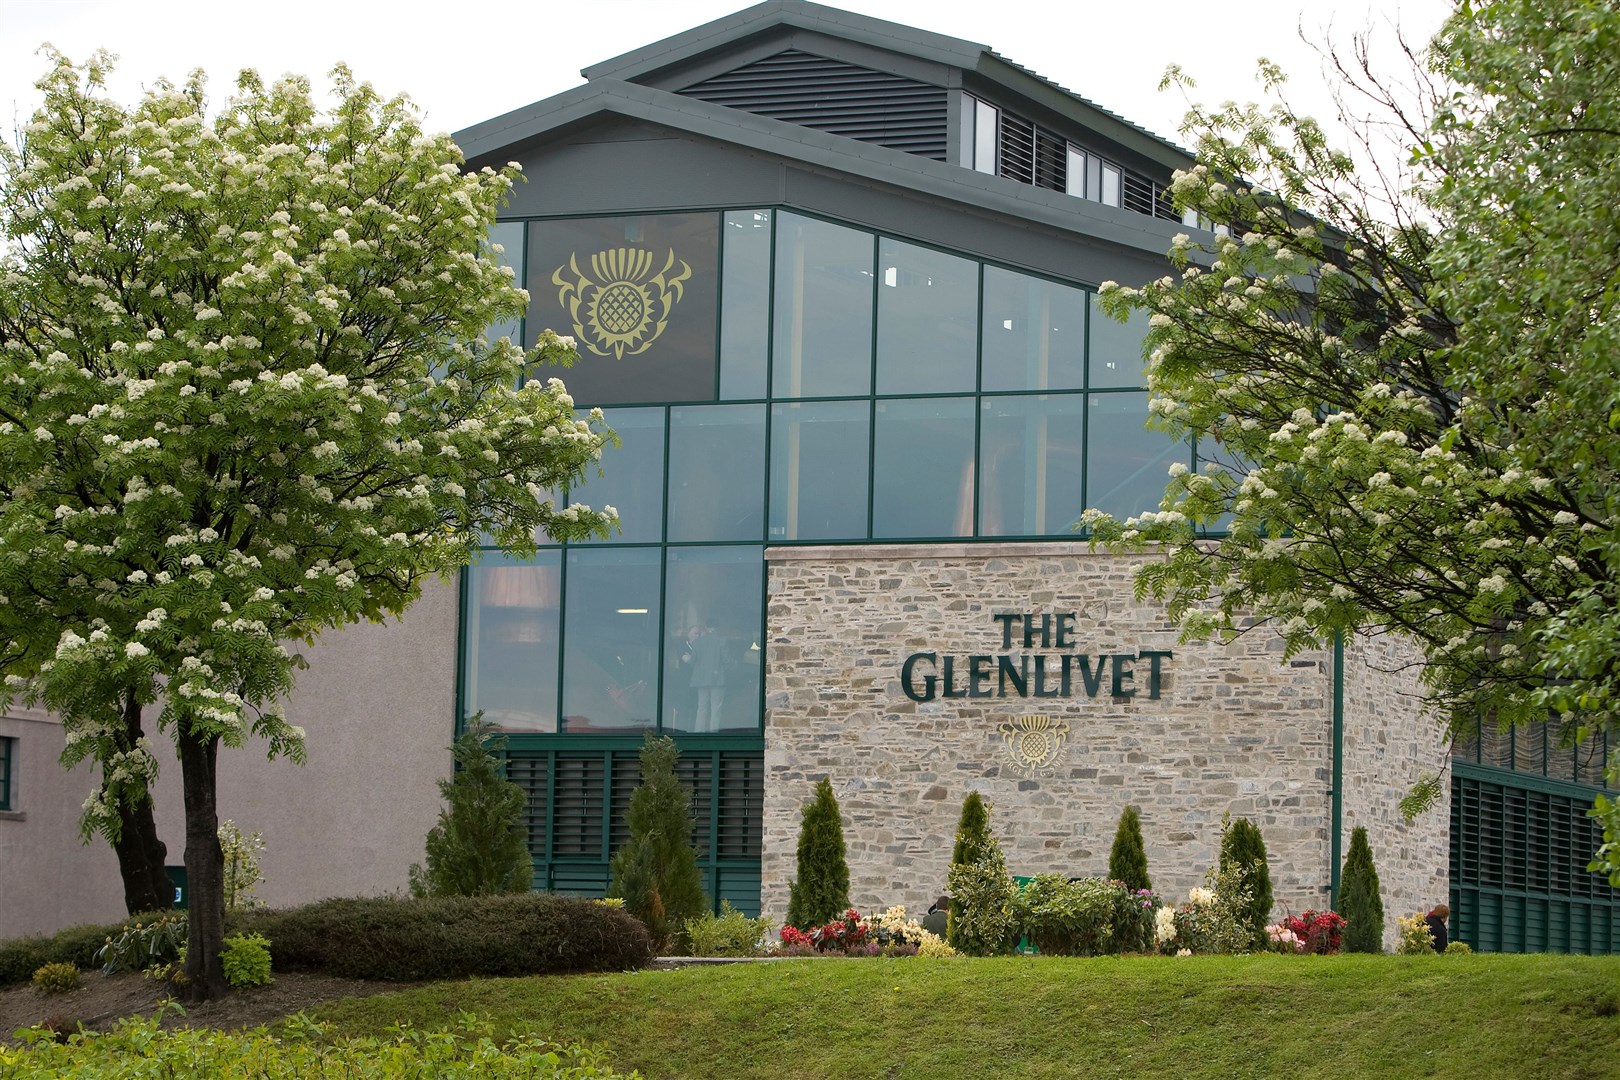 The whisky giant employs thousands of people across Scotland which includes workers at Glenlivet Distillery.